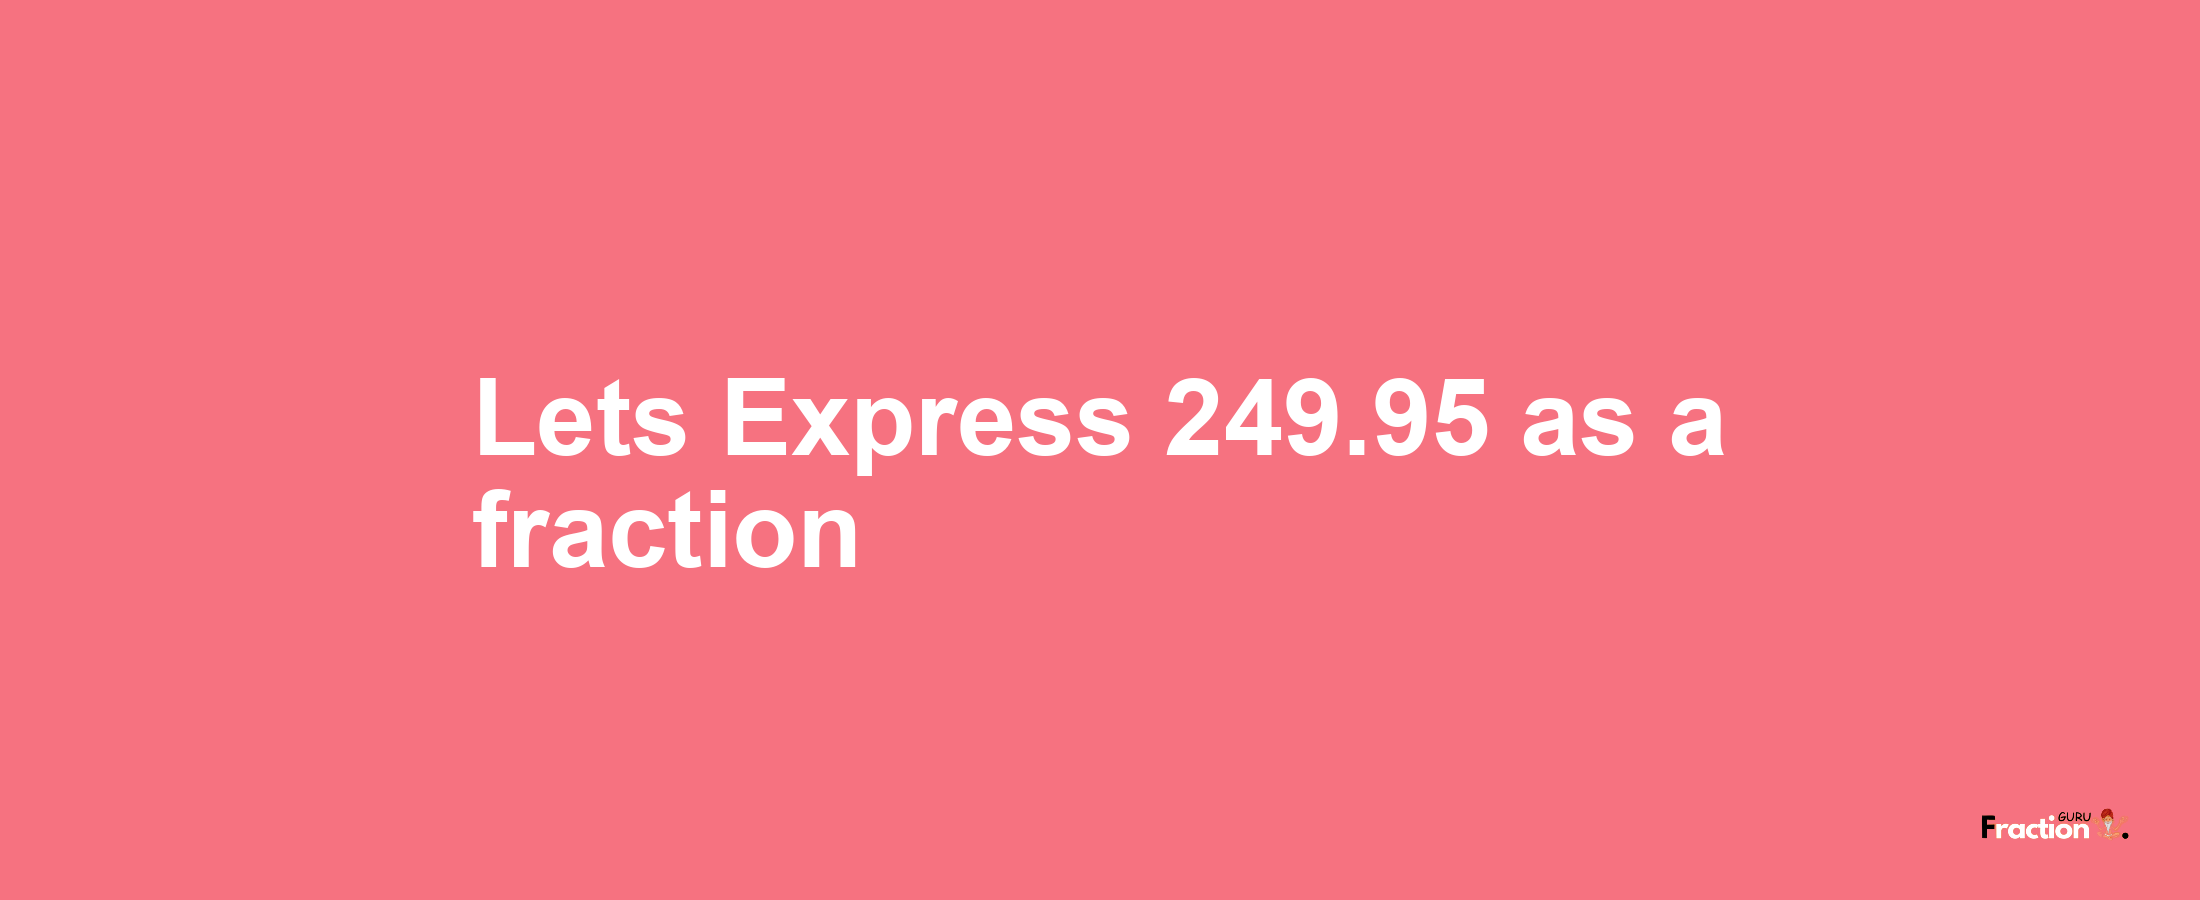 Lets Express 249.95 as afraction